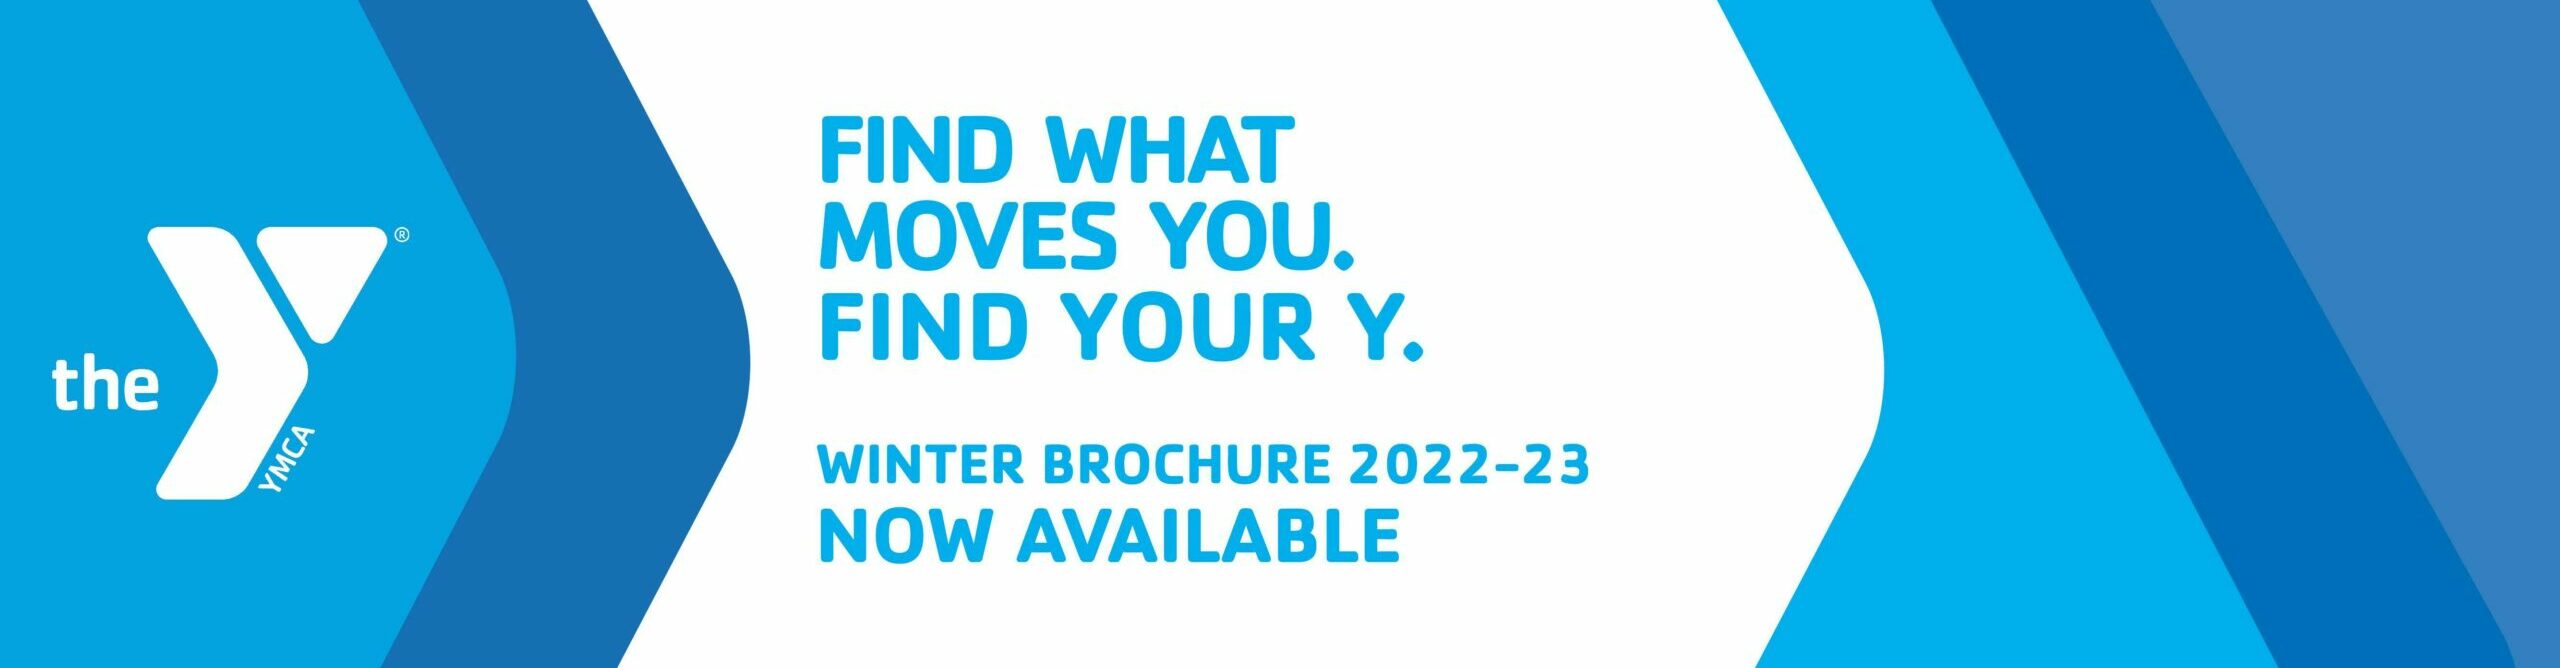 Find What Moves You. Find Your Y. Winter Brochure available now